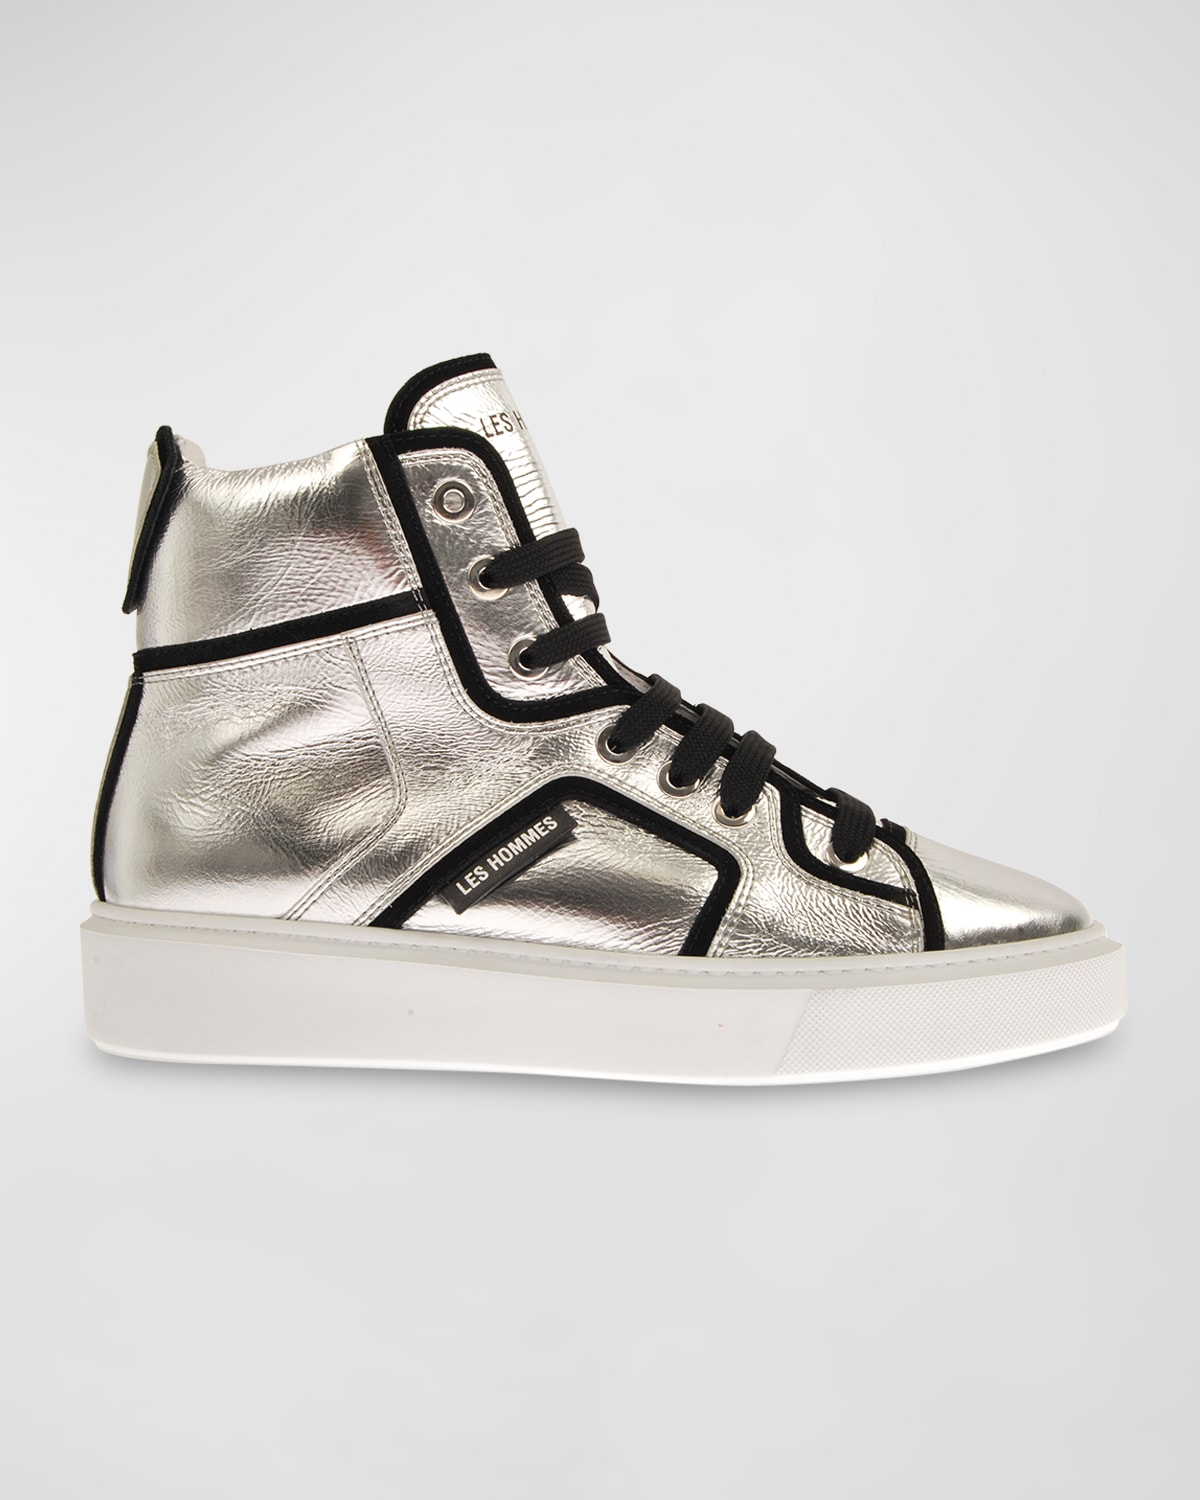 Les Hommes Men's Metallic Leather High-top Sneakers In Silver